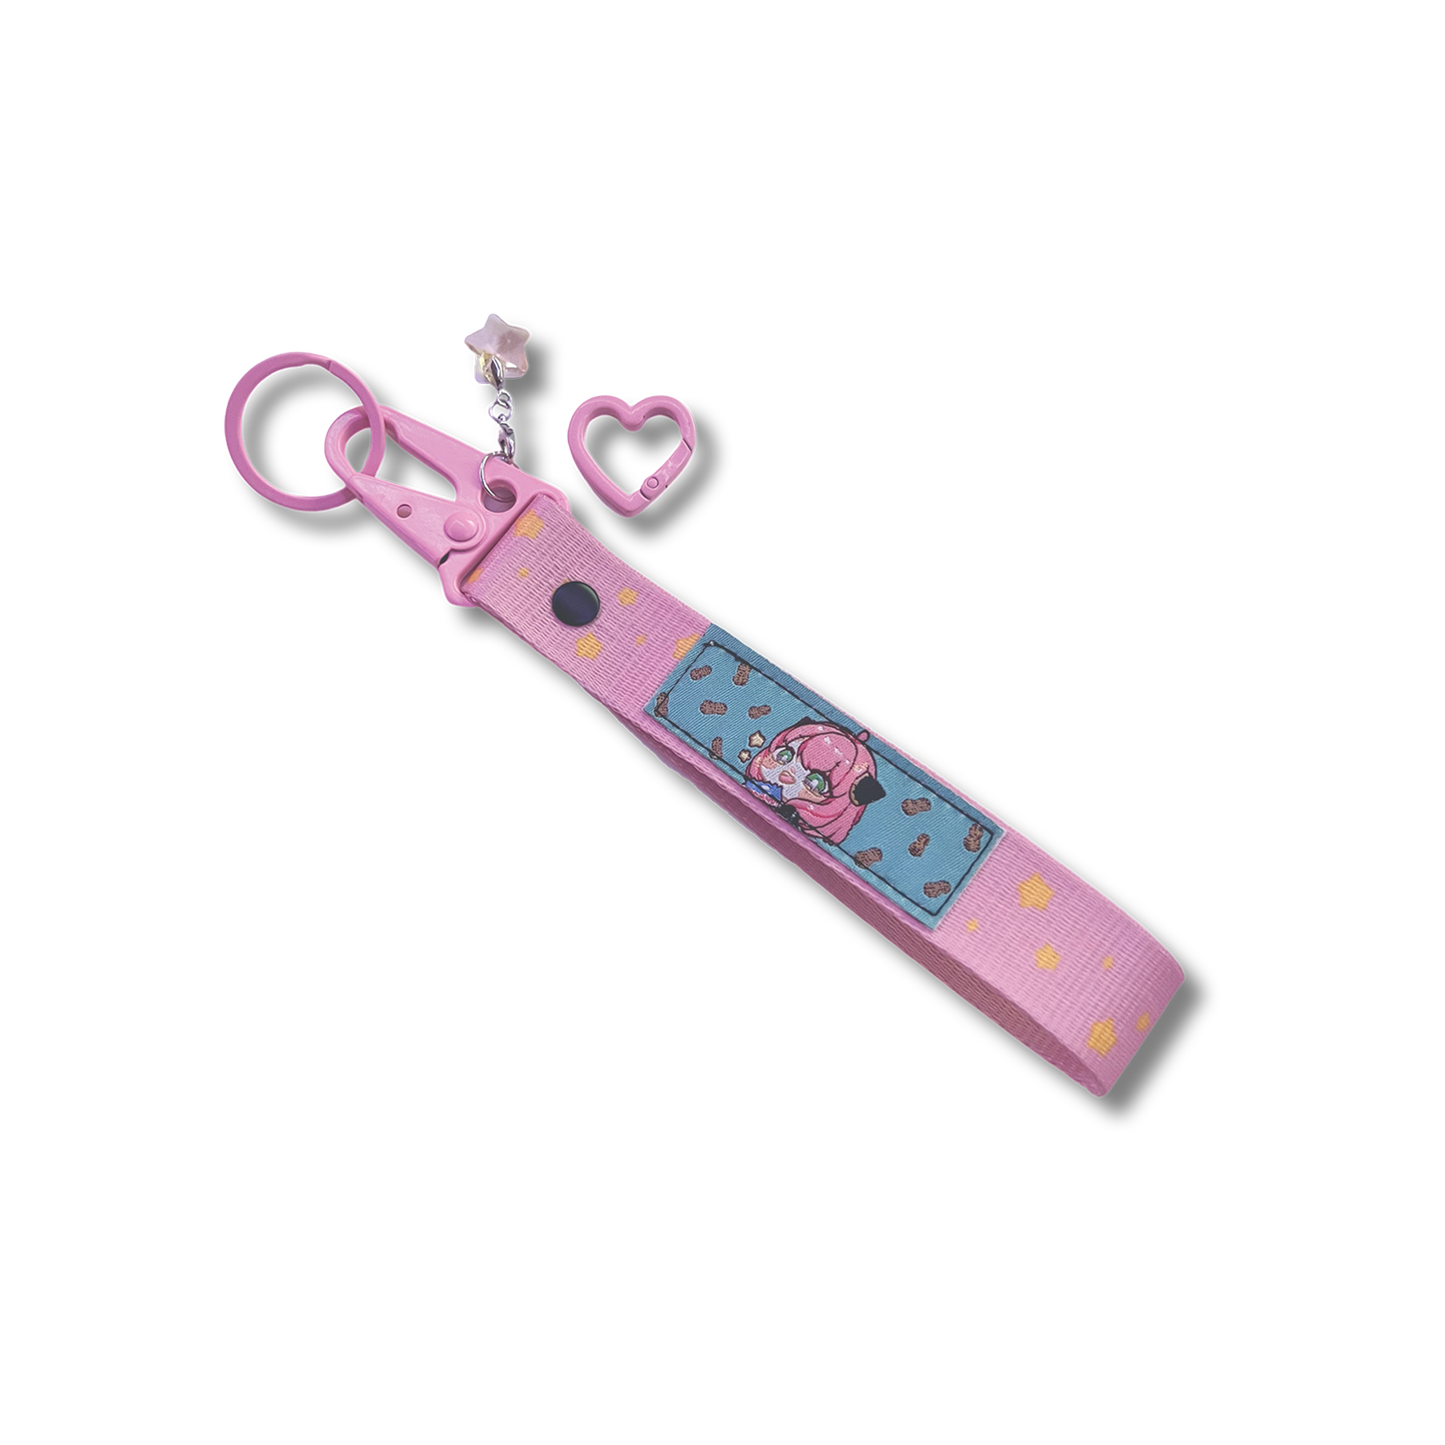 Anya Key Strap is a pink woven key strap with Anya Forger on a patch, with a star charm added and a heart carabiner attachment.